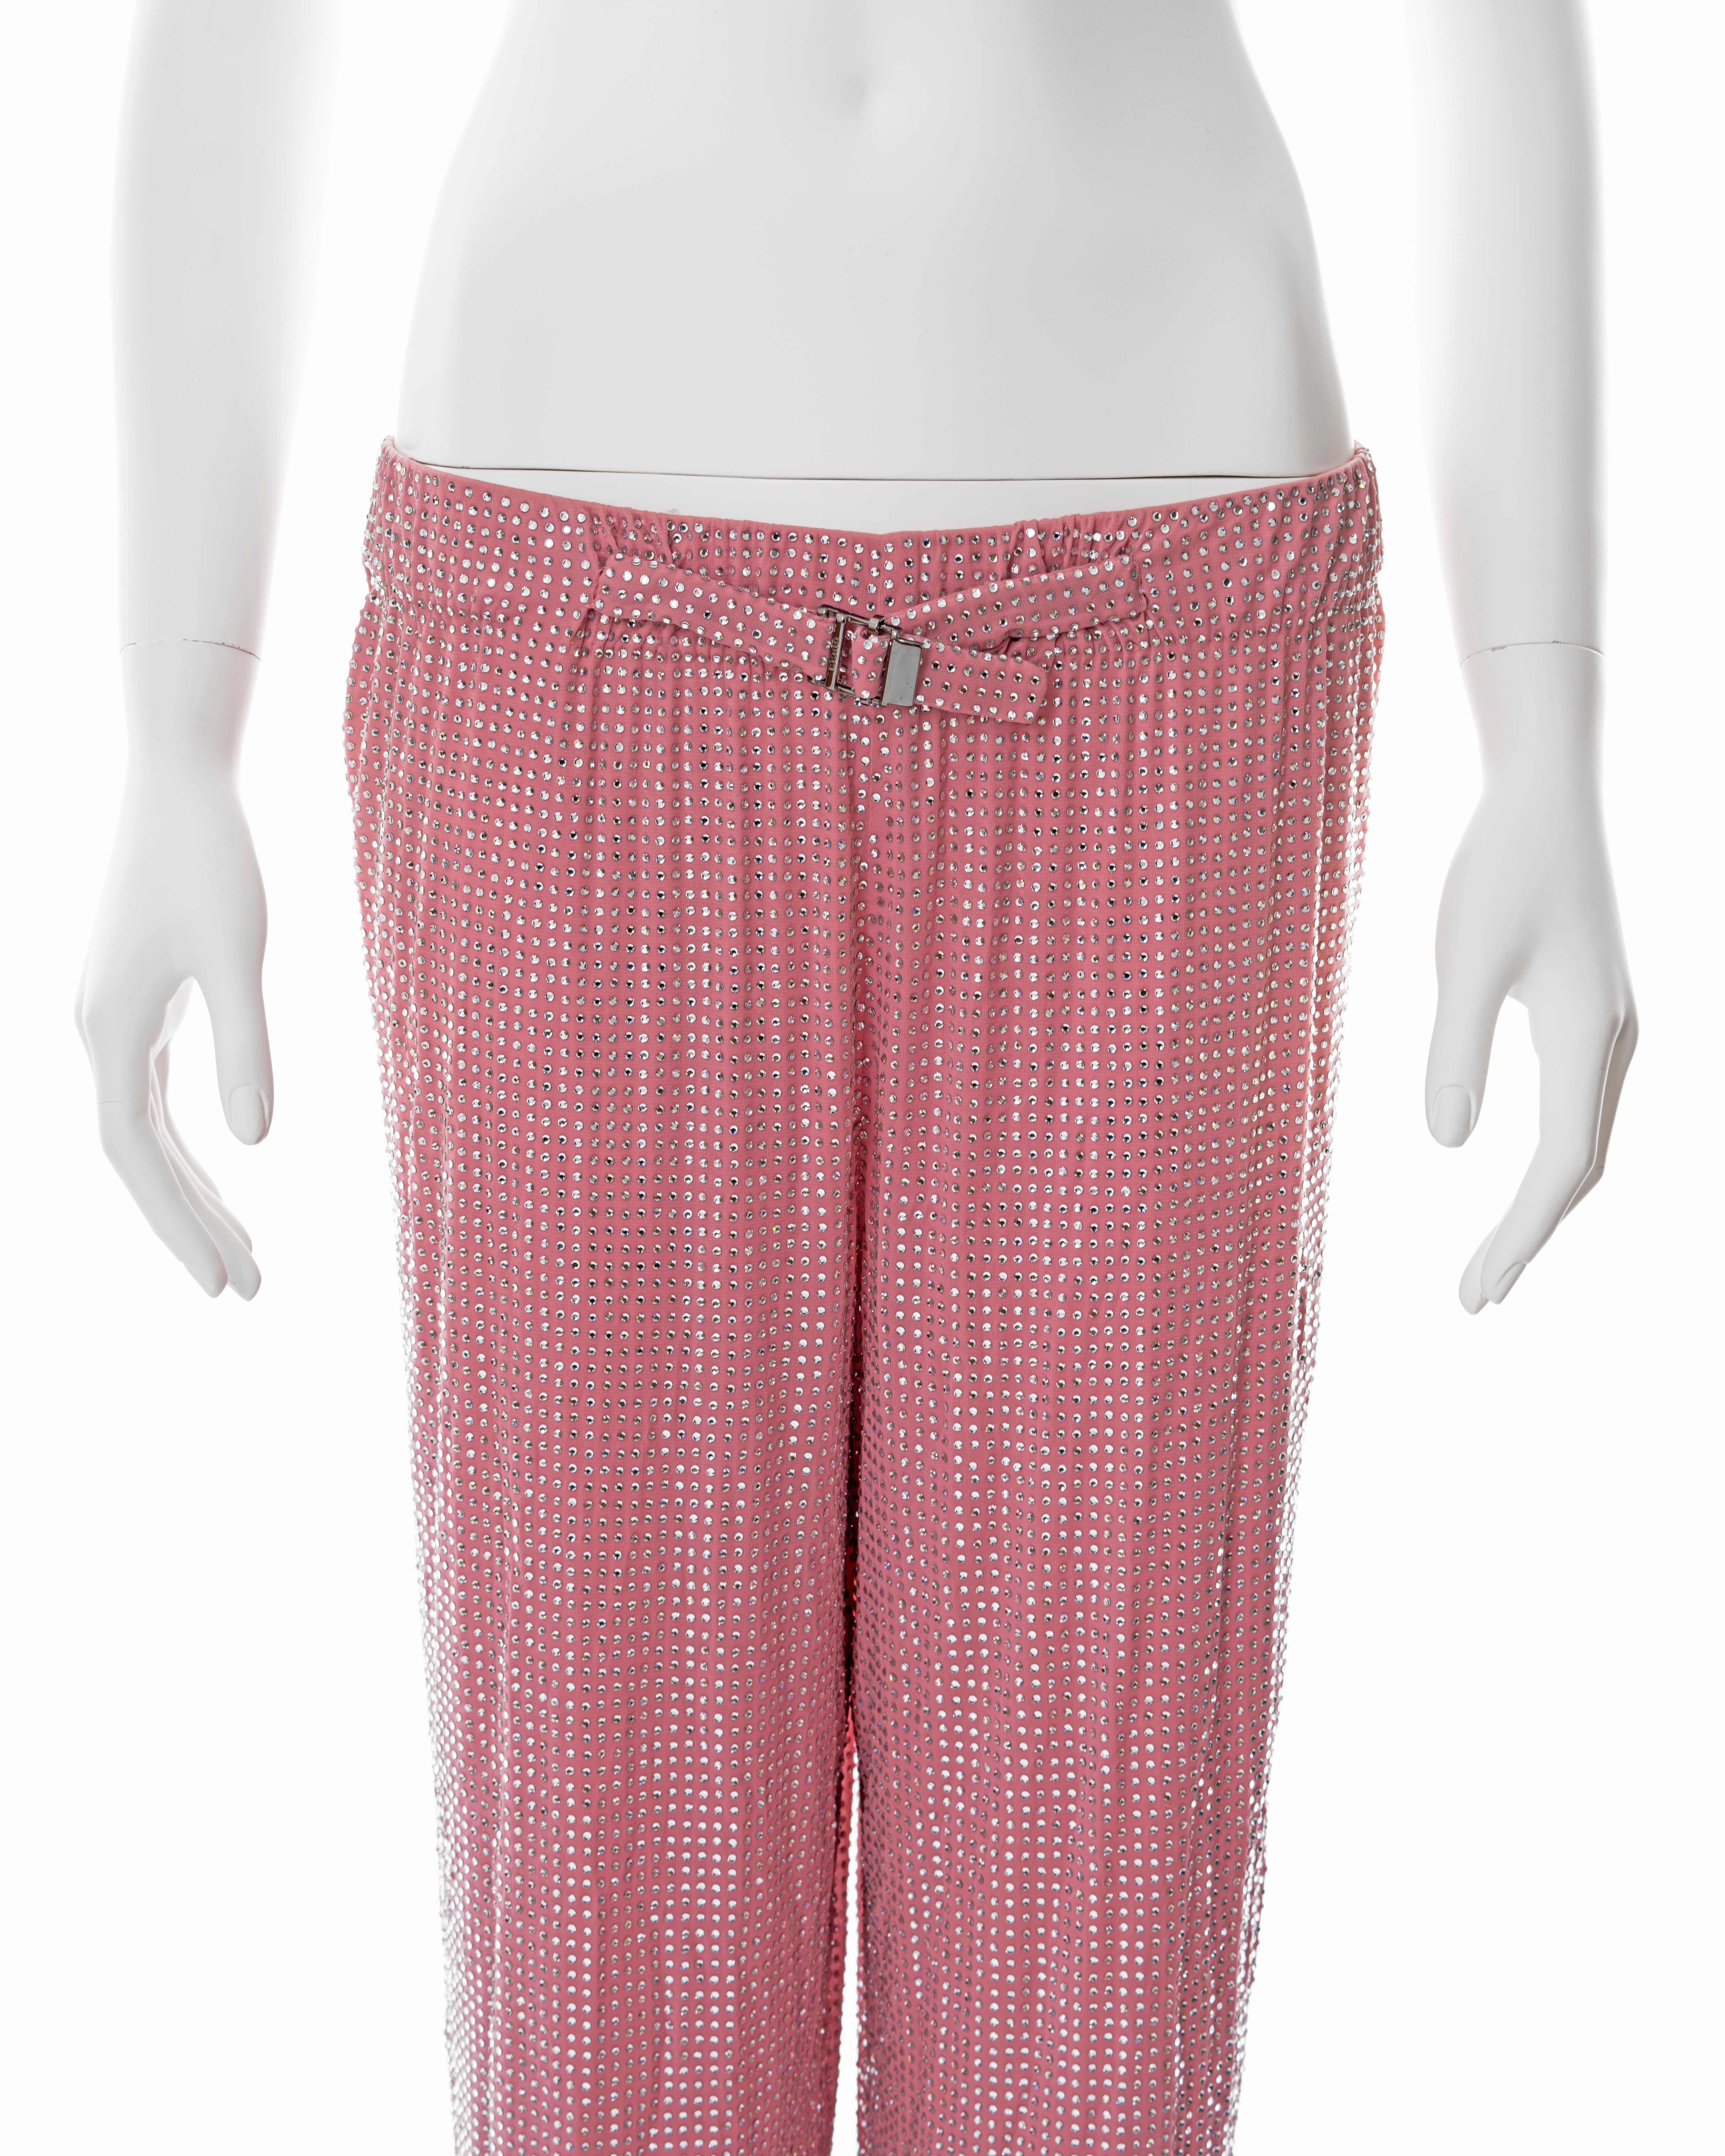 tom ford pink trousers